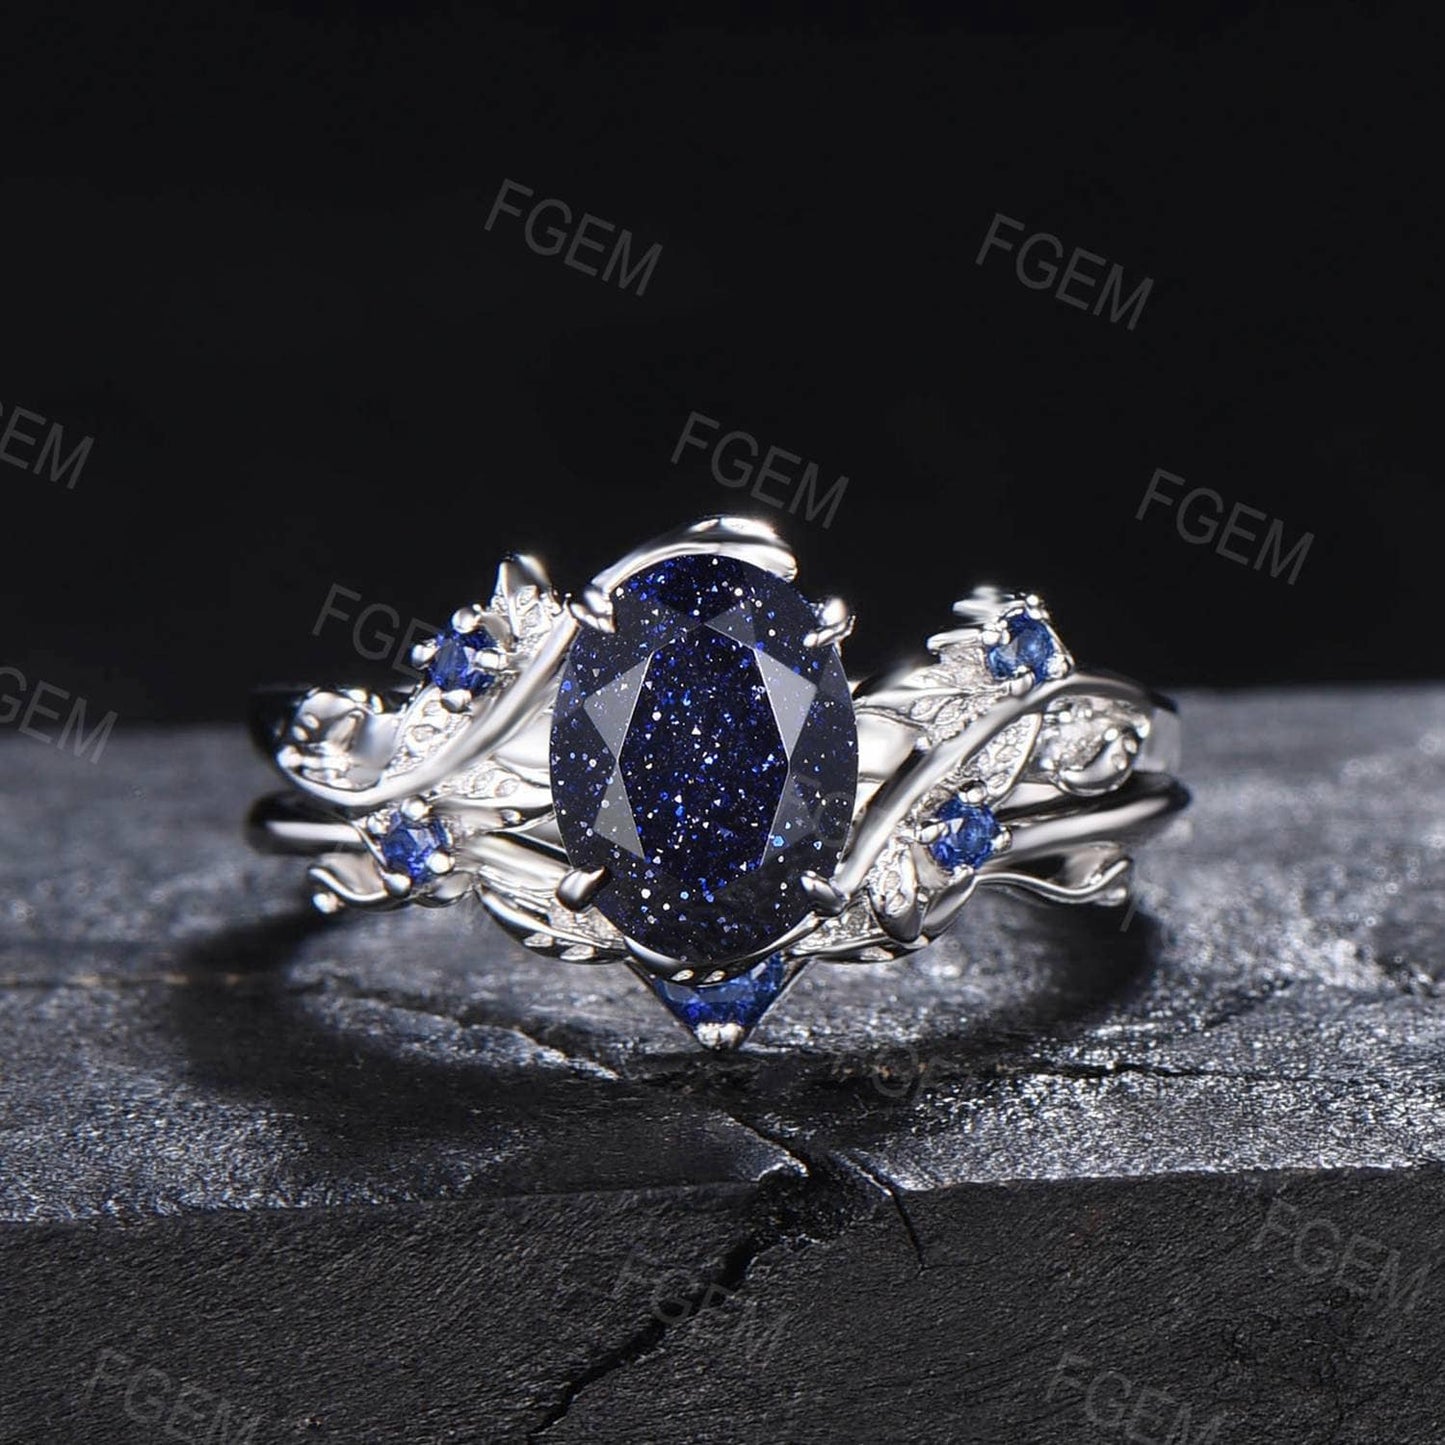 Black Gold Engagement Ring 1.5CT Oval Nature Inspired Starry Sky Galaxy Blue Sandstone Wedding Ring Set Cluster Blue Sapphire Bridal Sets